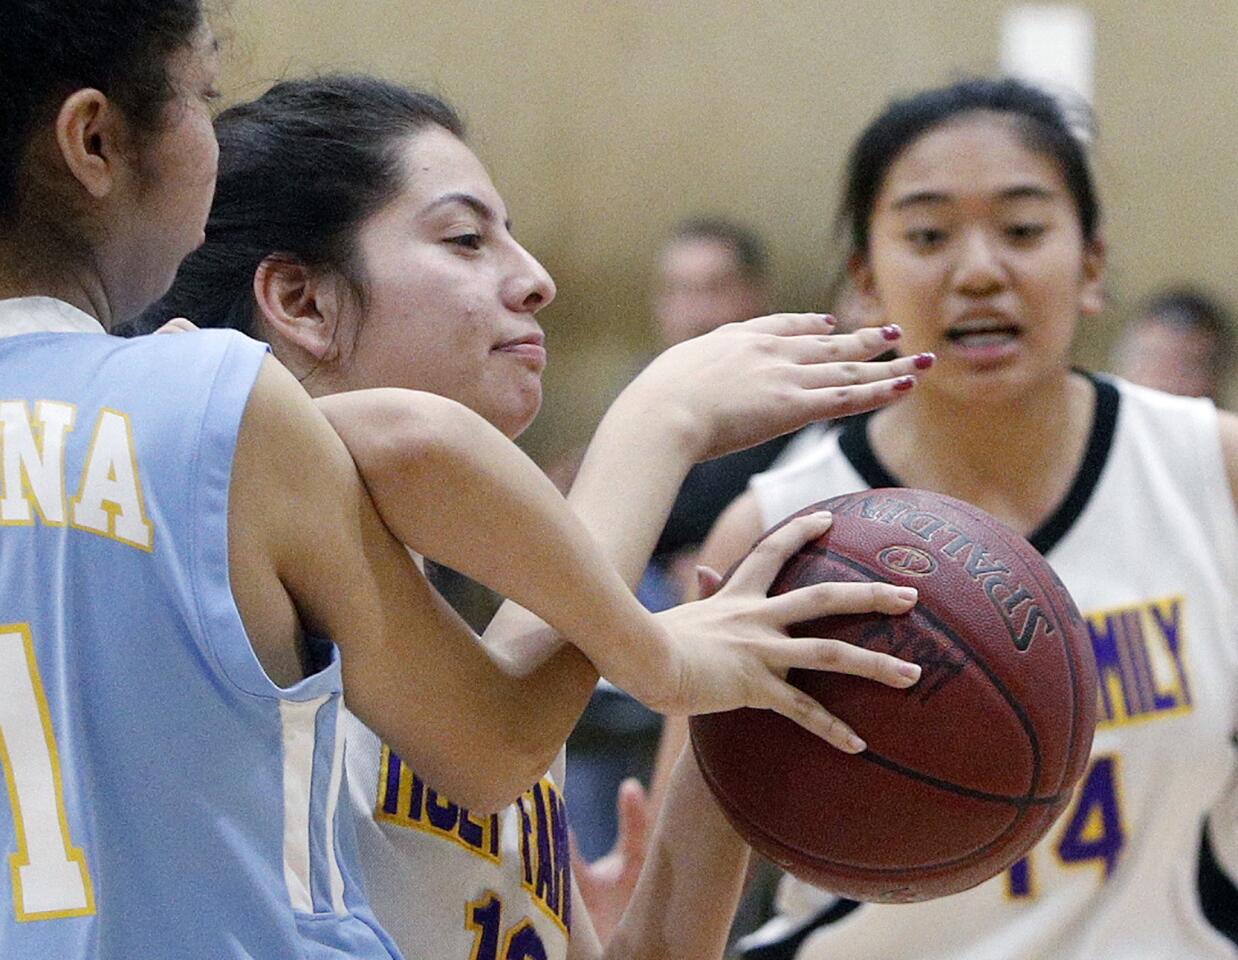 Holy Family's Ashley Margarito and Ramona Convent's Calista Rugama tangle their arms together battling for a rebound in a Horizon League girls' basketball game at the Pacific Community Center & Park in Glendale on Thursday, January 10, 2019.